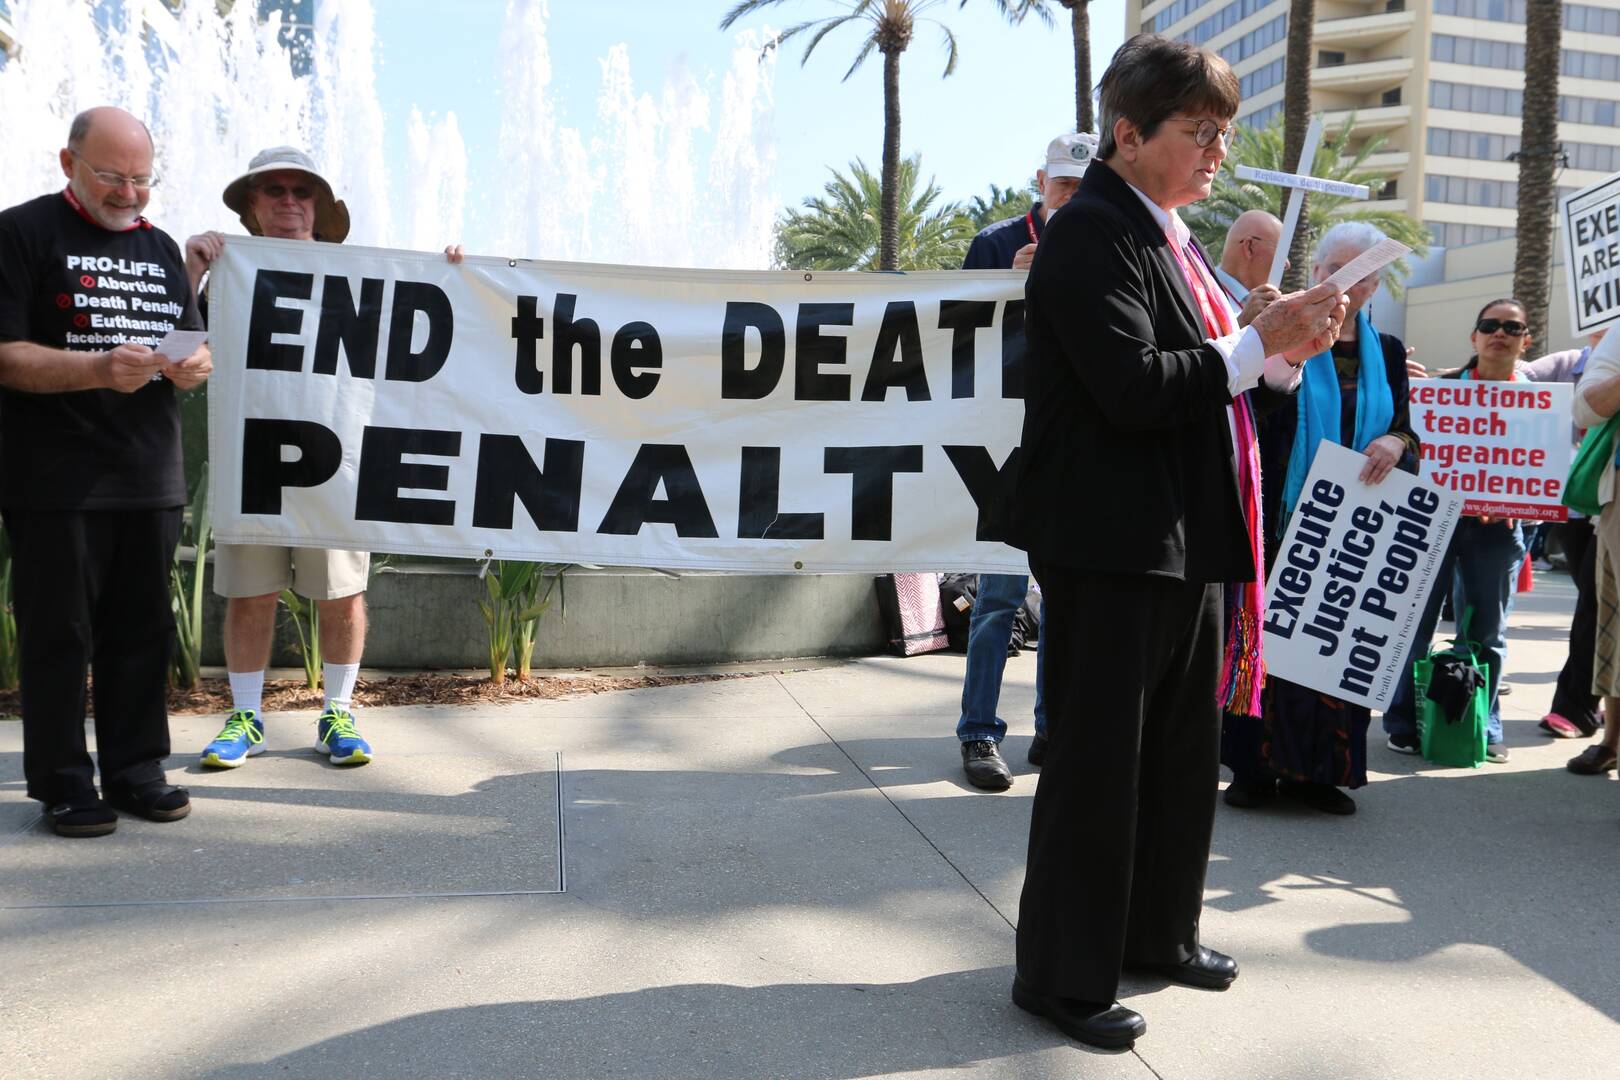 Helen Prejean, of the Sisters of St. Joseph of Medaille, is seen in Anaheim, Calif., calling for an end to the death penalty, in this 2016 file photo. The U.S. Supreme Court sent a death penalty case back to the Texas Court of Criminal Appeals on June 15, 2020. (CNS photo/J.D. Long-Garcia, The Tidings)